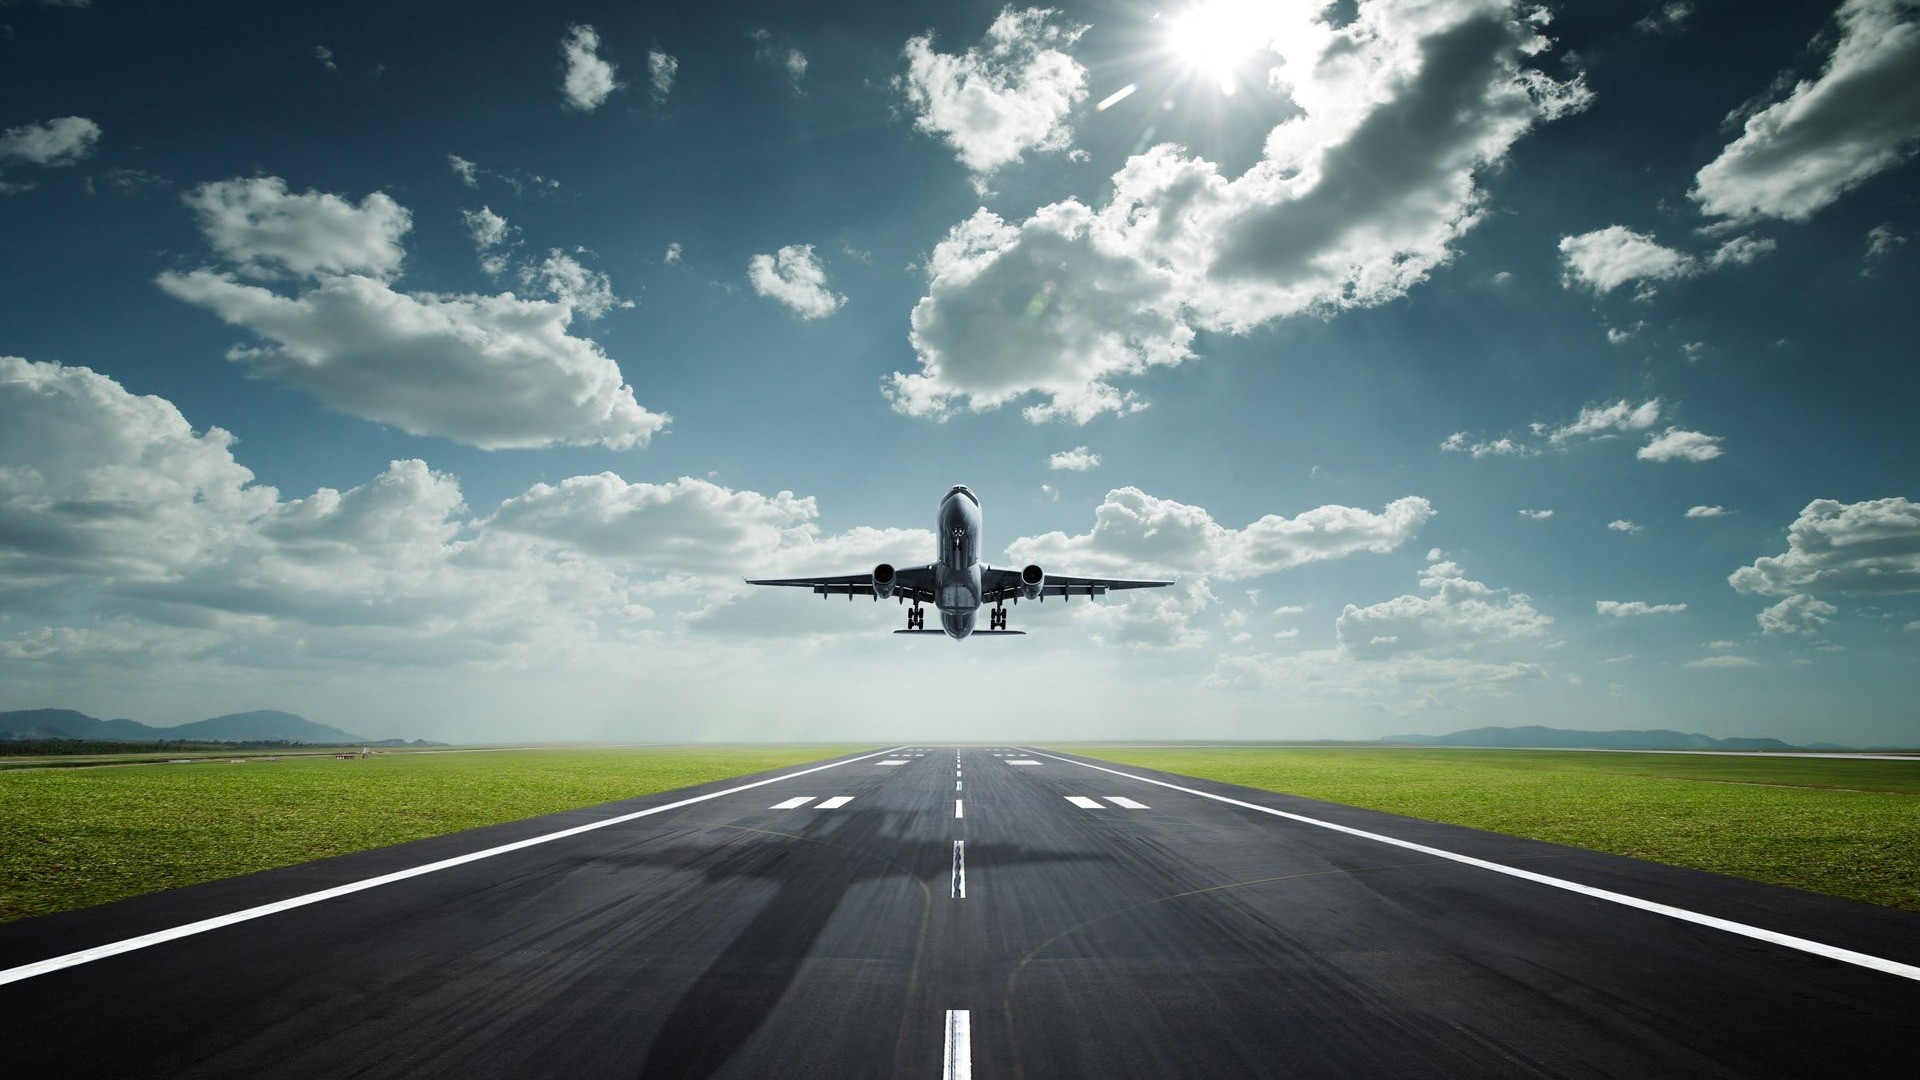 vehicles, airplane, flight, takeoff, aircraft wallpaper for mobile